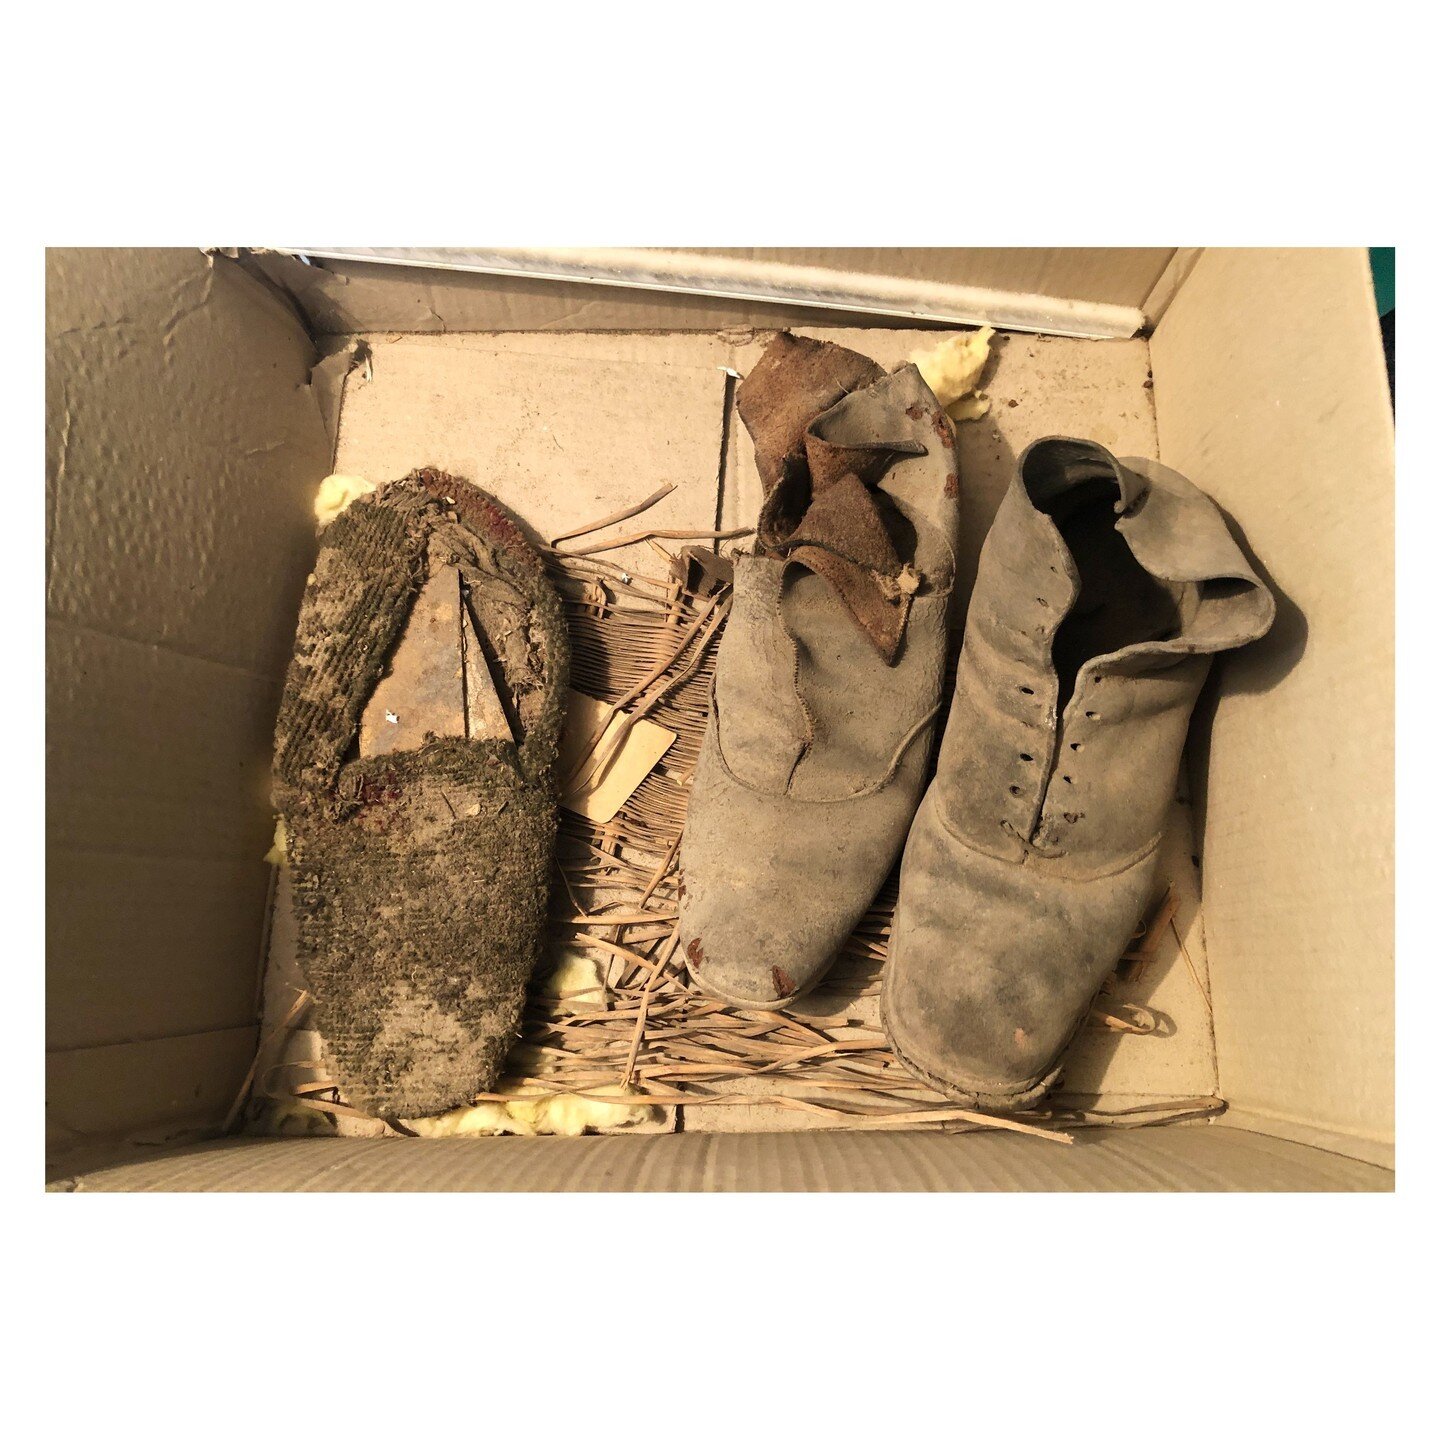 On Site find part 1: Apparently, shoes are the most common apotropaics (meaning 'turning evil away'). So the theory goes, a malevolent spirit would enter the shoe and become trapped there. It seems shoes were chosen as they take on the shape of their